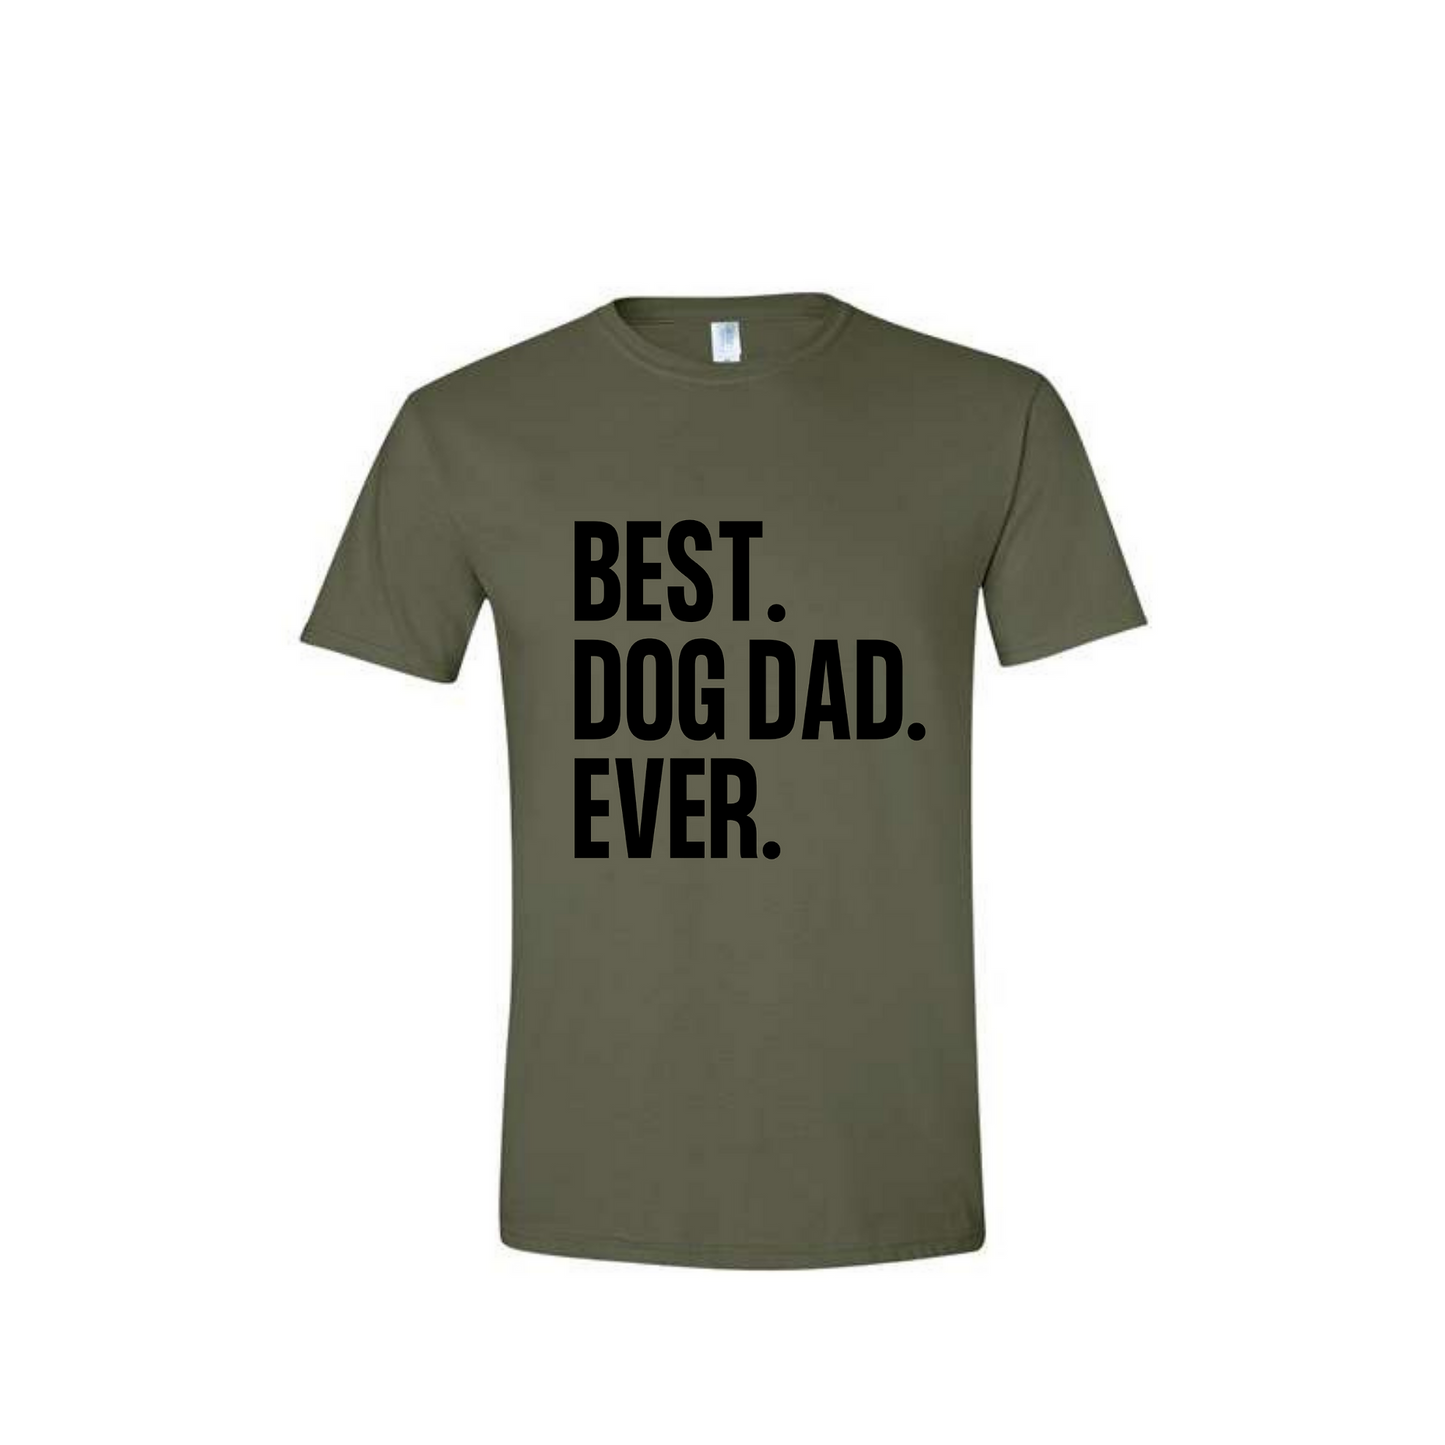 Best Dog Dad Ever - Army Green T-Shirt